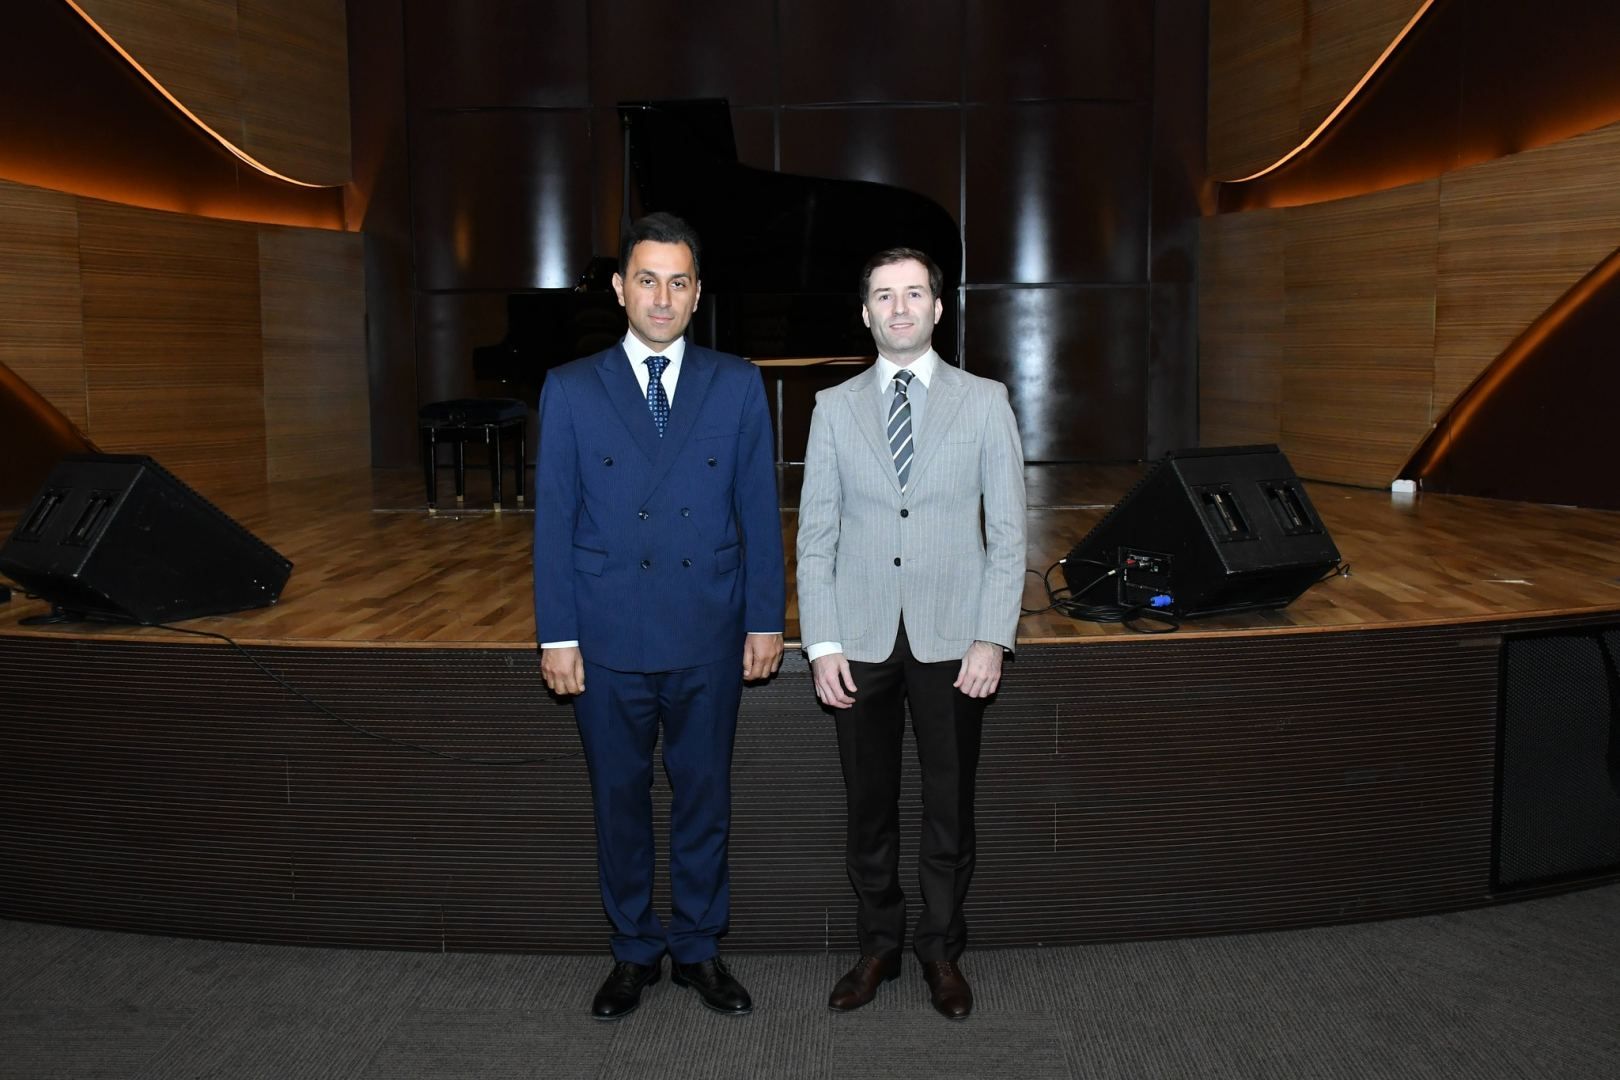 Newly appointed director of Mugham Center introduced to his team [PHOTOS]